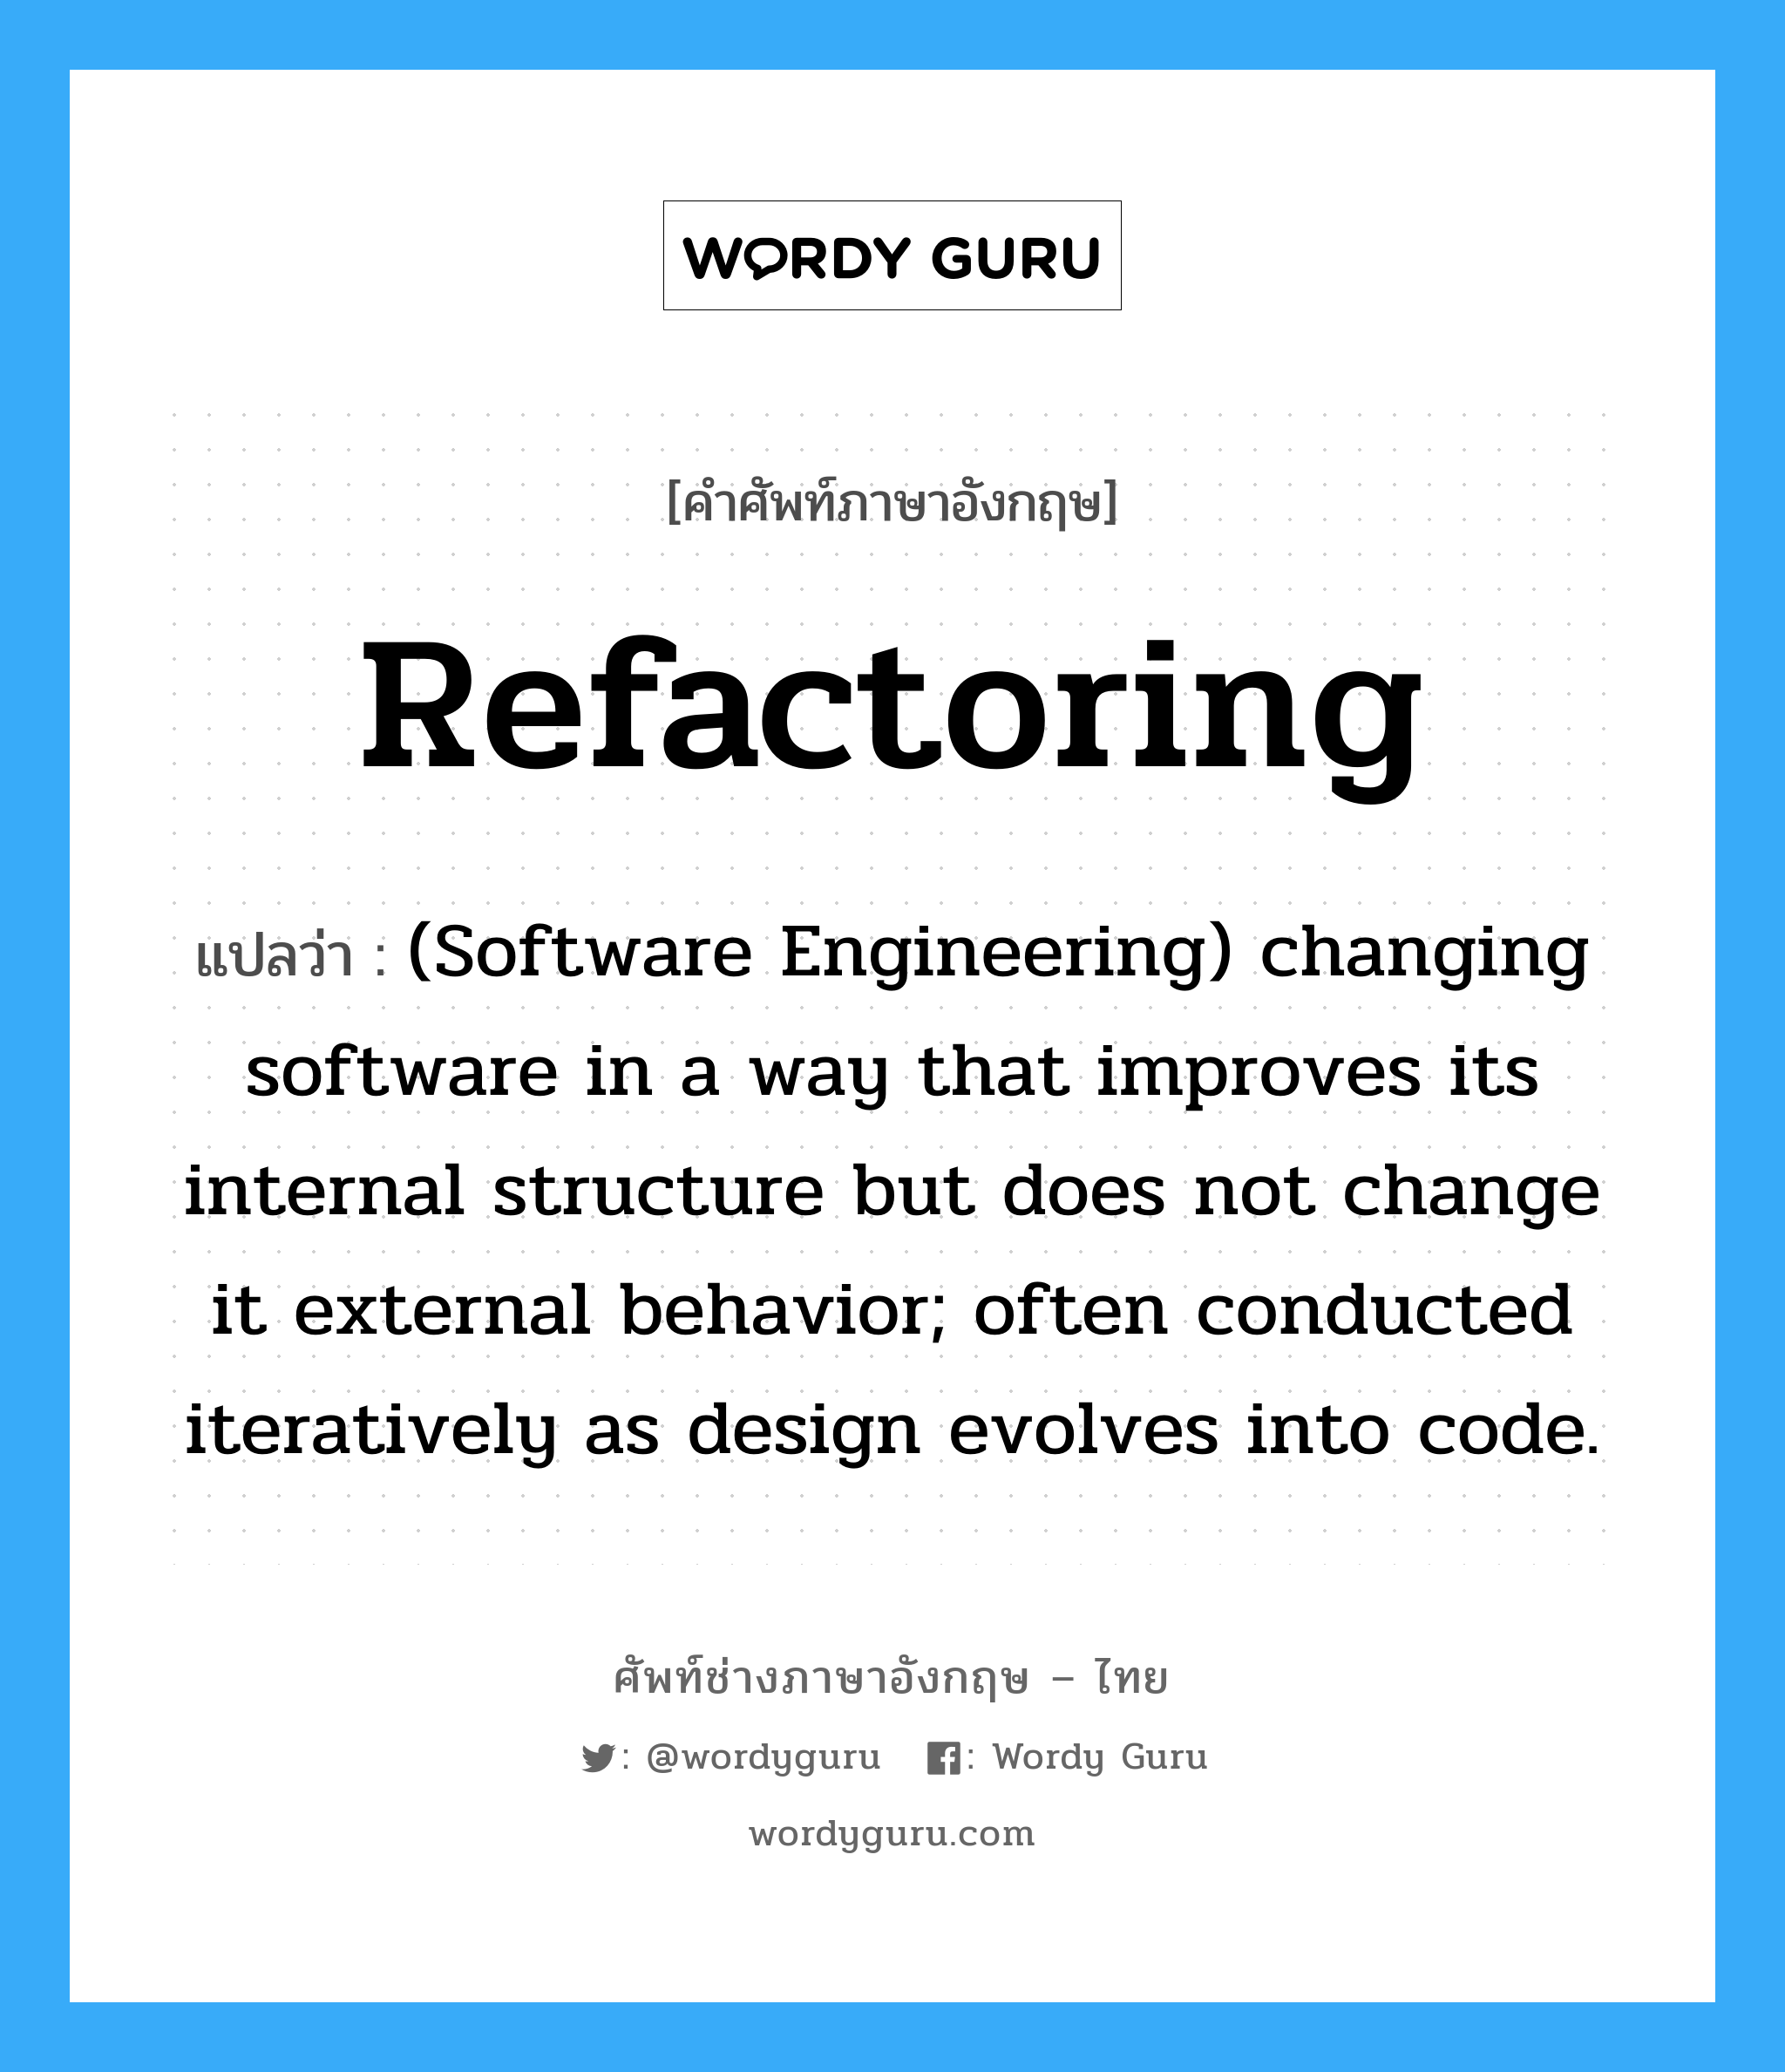 (Software Engineering) changing software in a way that improves its internal structure but does not change it external behavior; often conducted iteratively as design evolves into code. ภาษาอังกฤษ?, คำศัพท์ช่างภาษาอังกฤษ - ไทย (Software Engineering) changing software in a way that improves its internal structure but does not change it external behavior; often conducted iteratively as design evolves into code. คำศัพท์ภาษาอังกฤษ (Software Engineering) changing software in a way that improves its internal structure but does not change it external behavior; often conducted iteratively as design evolves into code. แปลว่า Refactoring